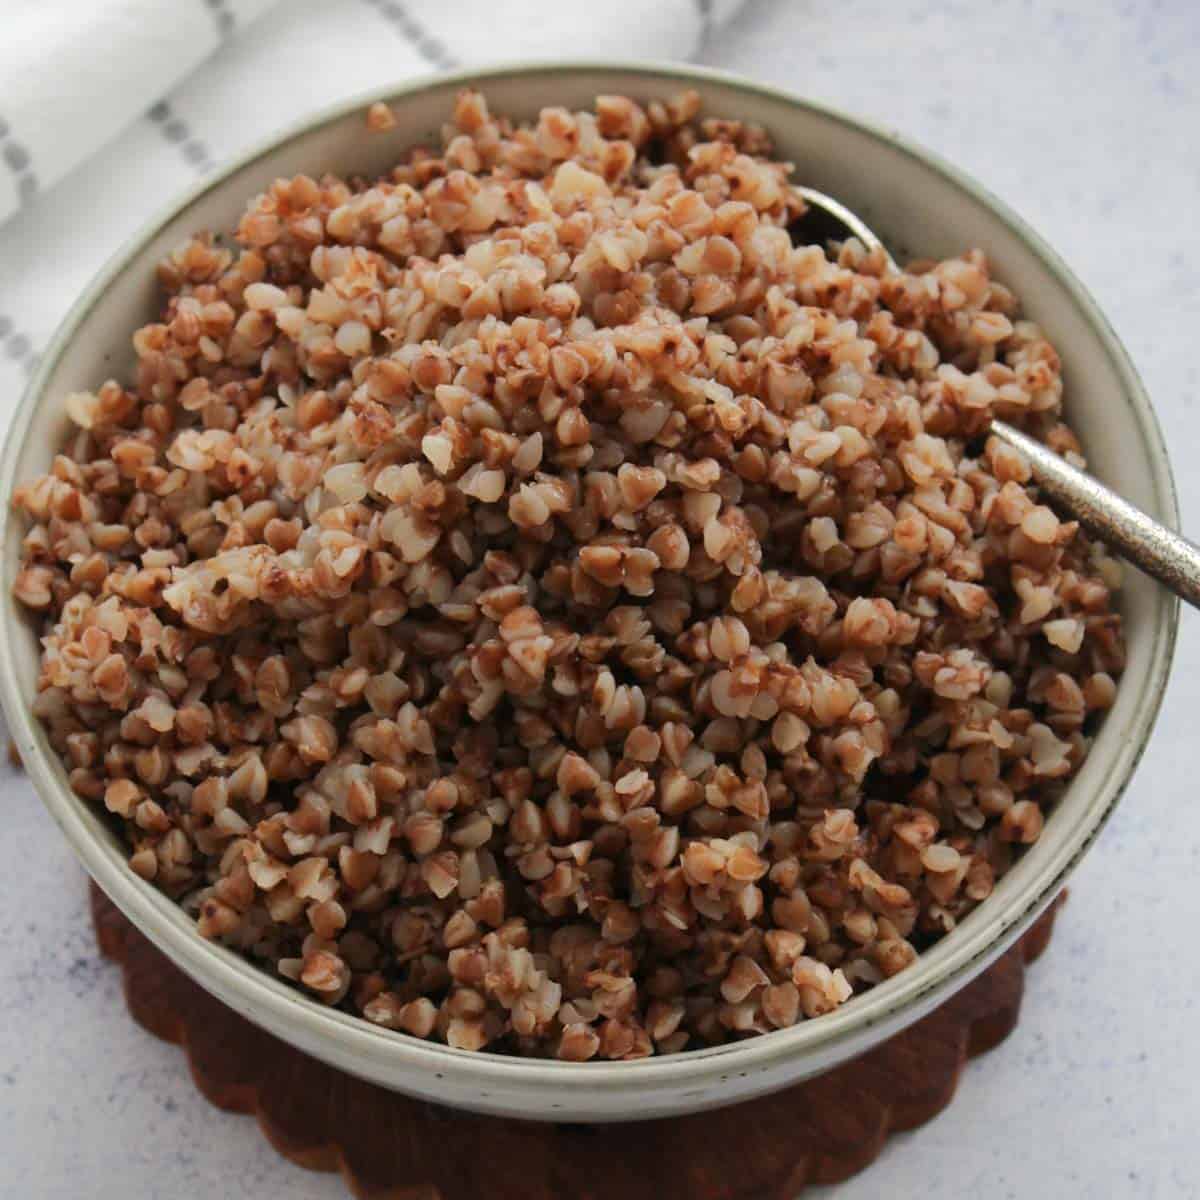 cooked buckwheat groats in a bowl